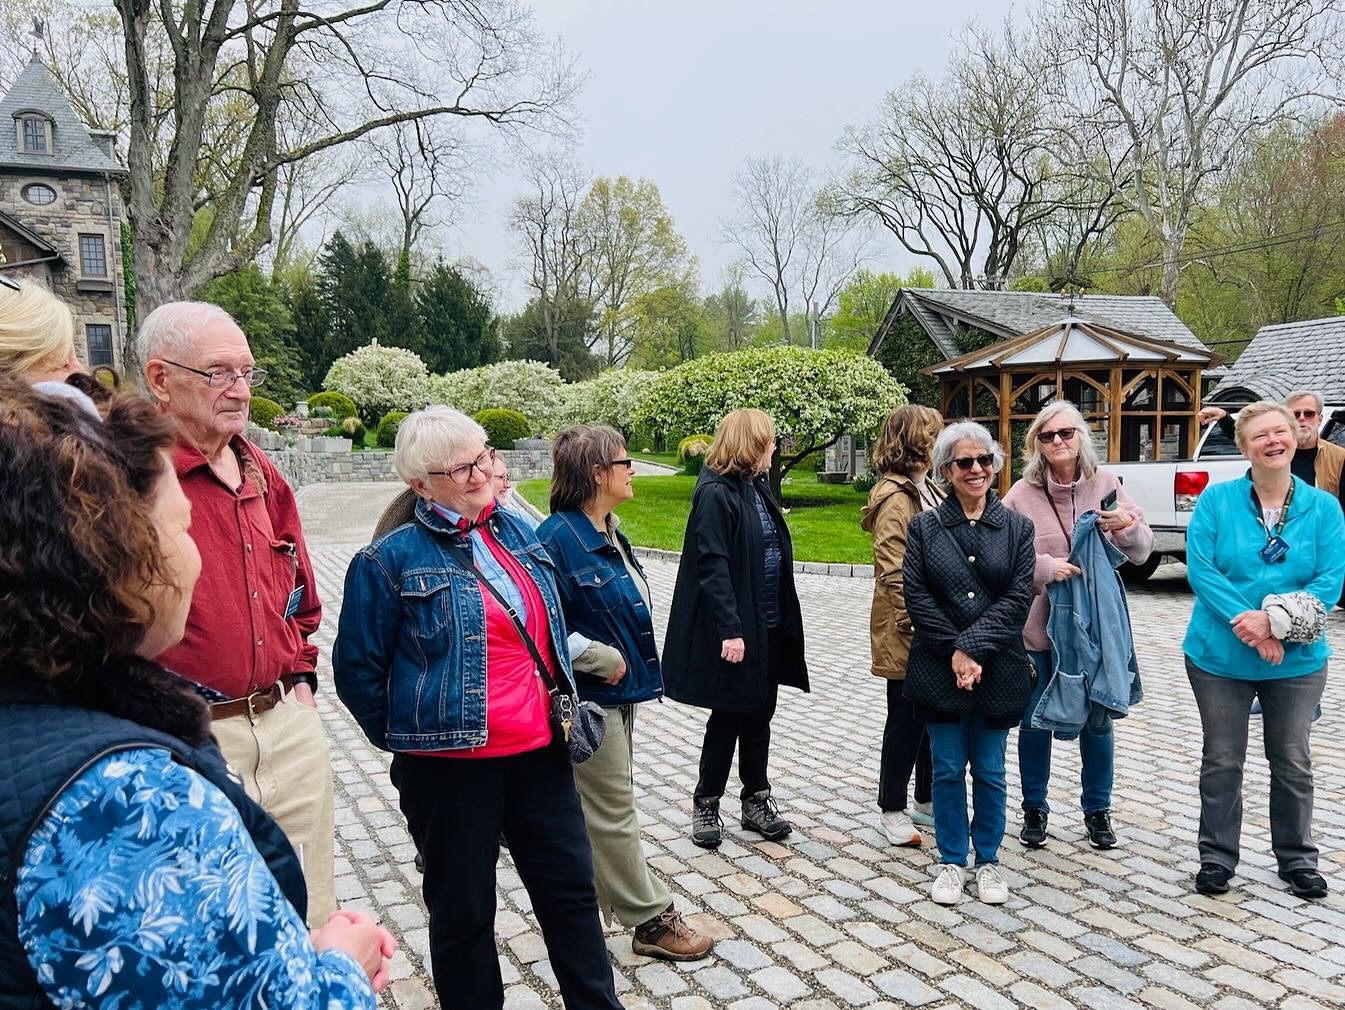 Heartfelt thanks to Fred Landman, owner of Sleepy Cat Farm, and horticulturalist, Alan Gorkin, for hosting members of the CMGA for an exclusive tour. From the exquisite gardens, with lavish landscapes, perfectly positioned sculptures, magnificent vis